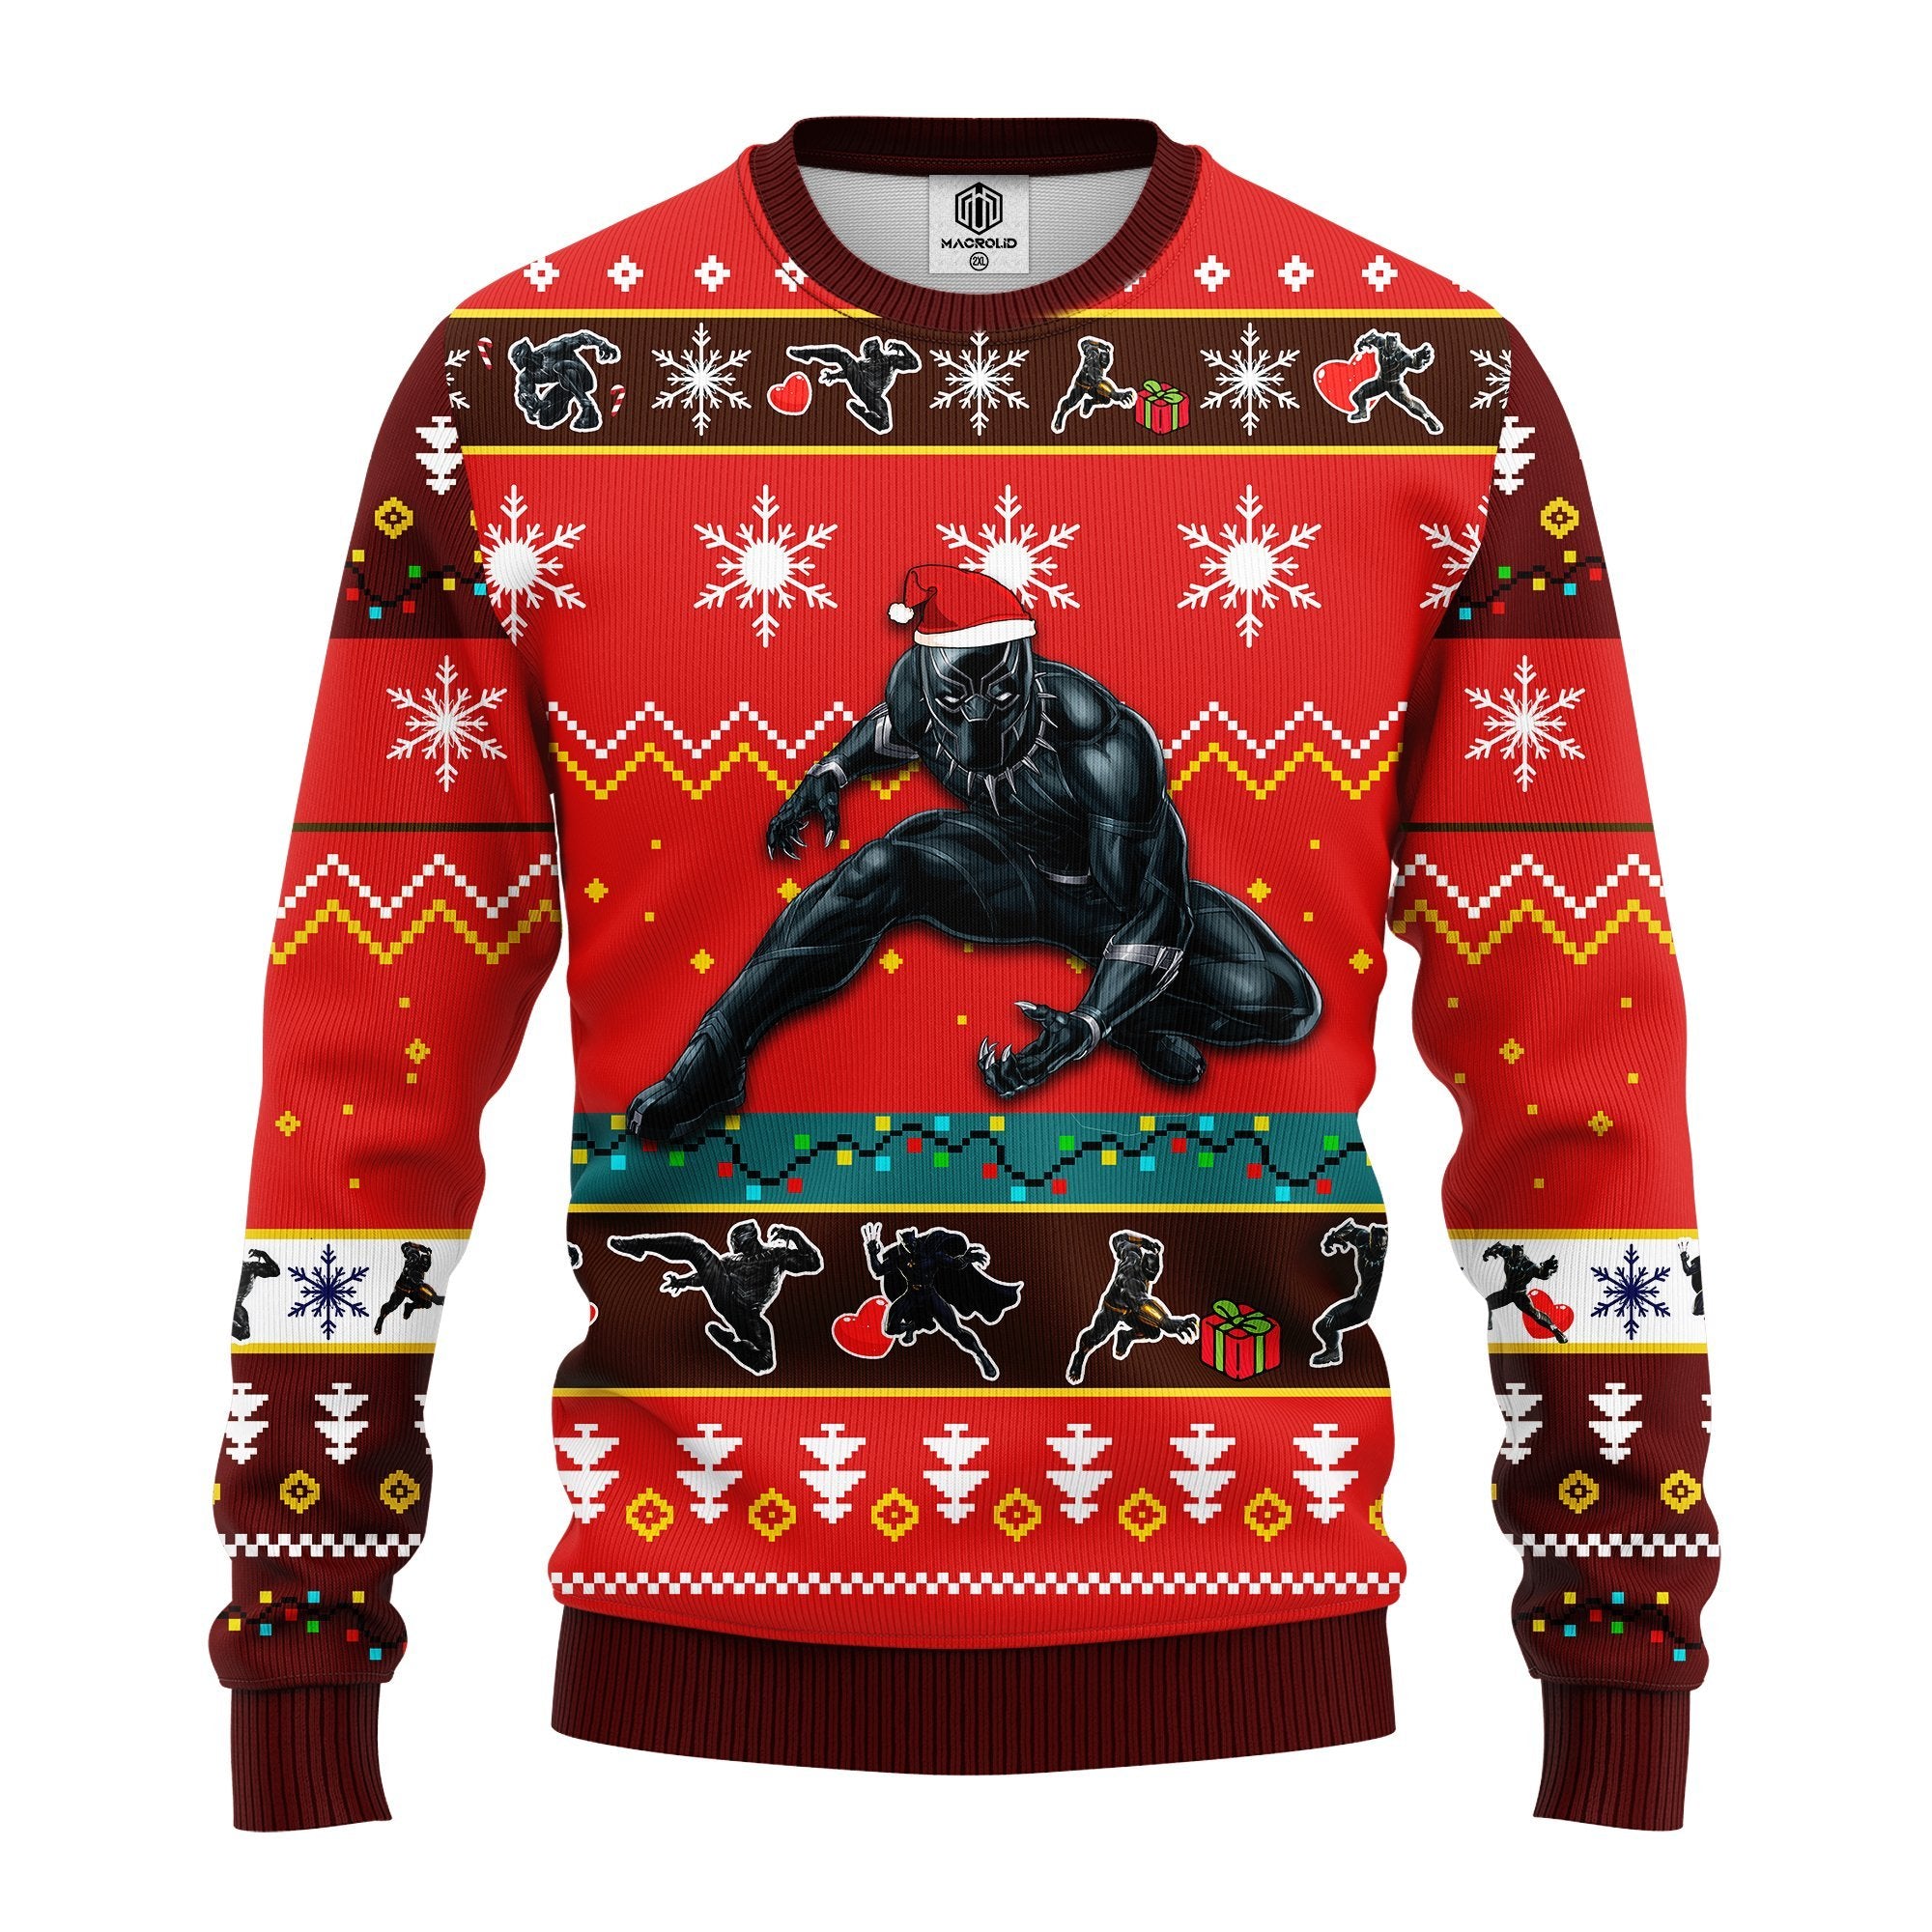 Black Panther Ugly Christmas Sweater Red Brown 1 Amazing Gift Idea Thanksgiving Gift